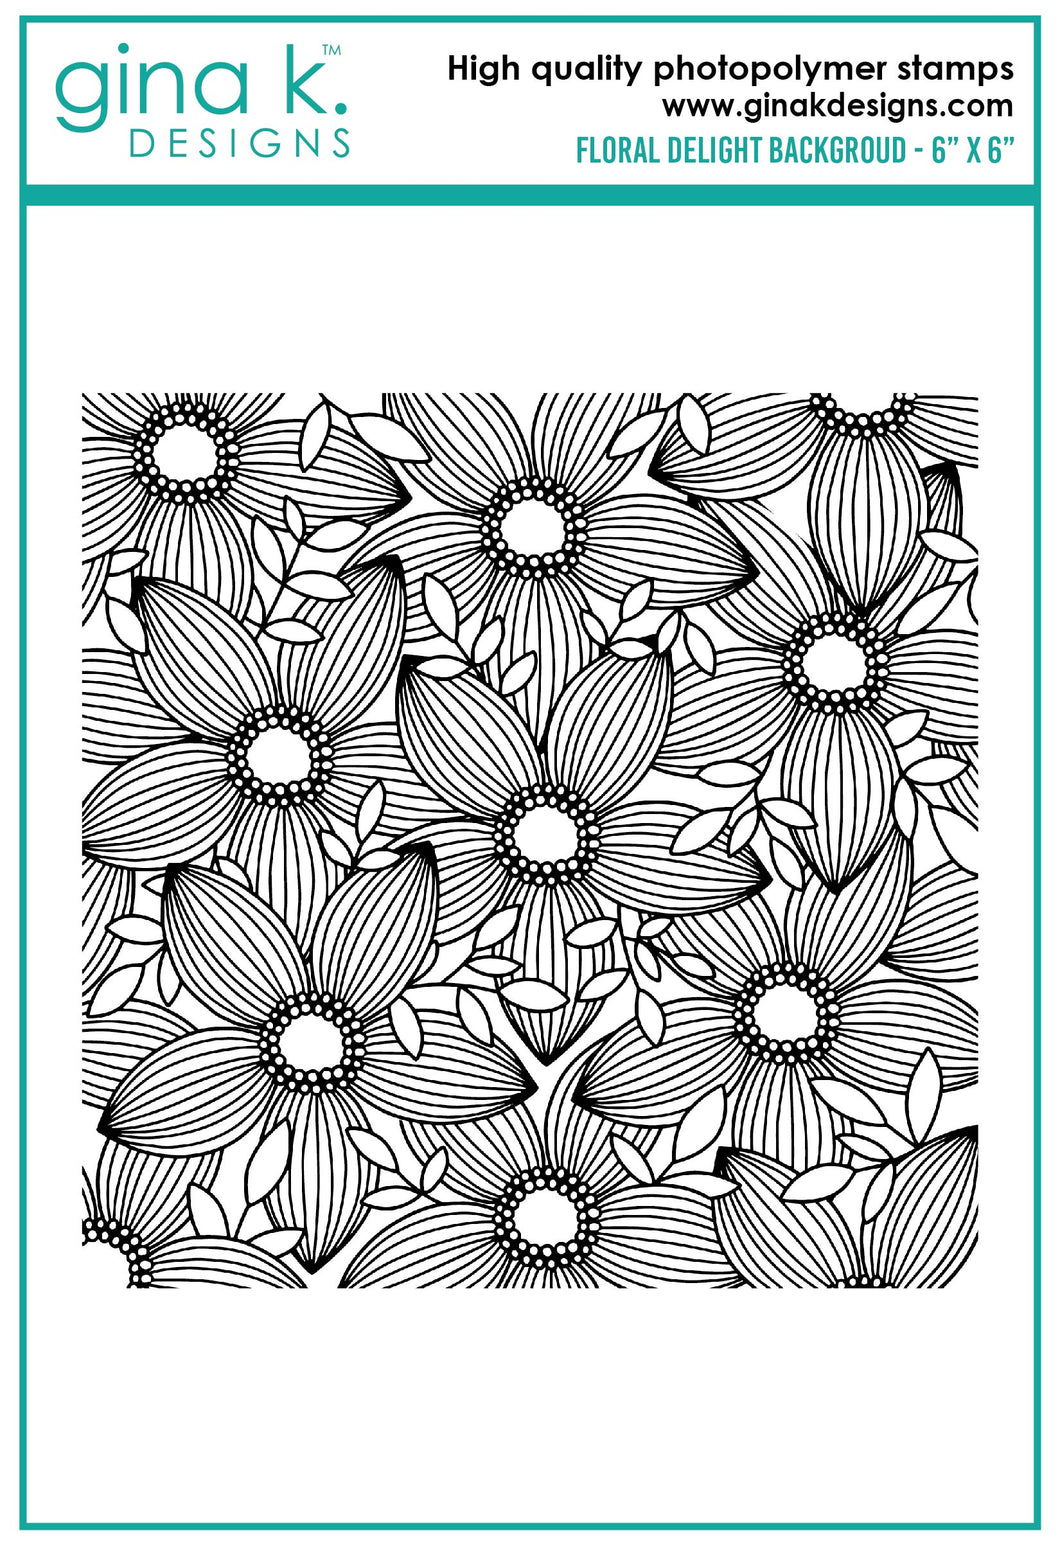 Gina K. Designs - Background Stamp - Floral Delight. Floral Delight Background is a stamp set by Arjita Singh. This set is made of premium clear photopolymer and measures 6